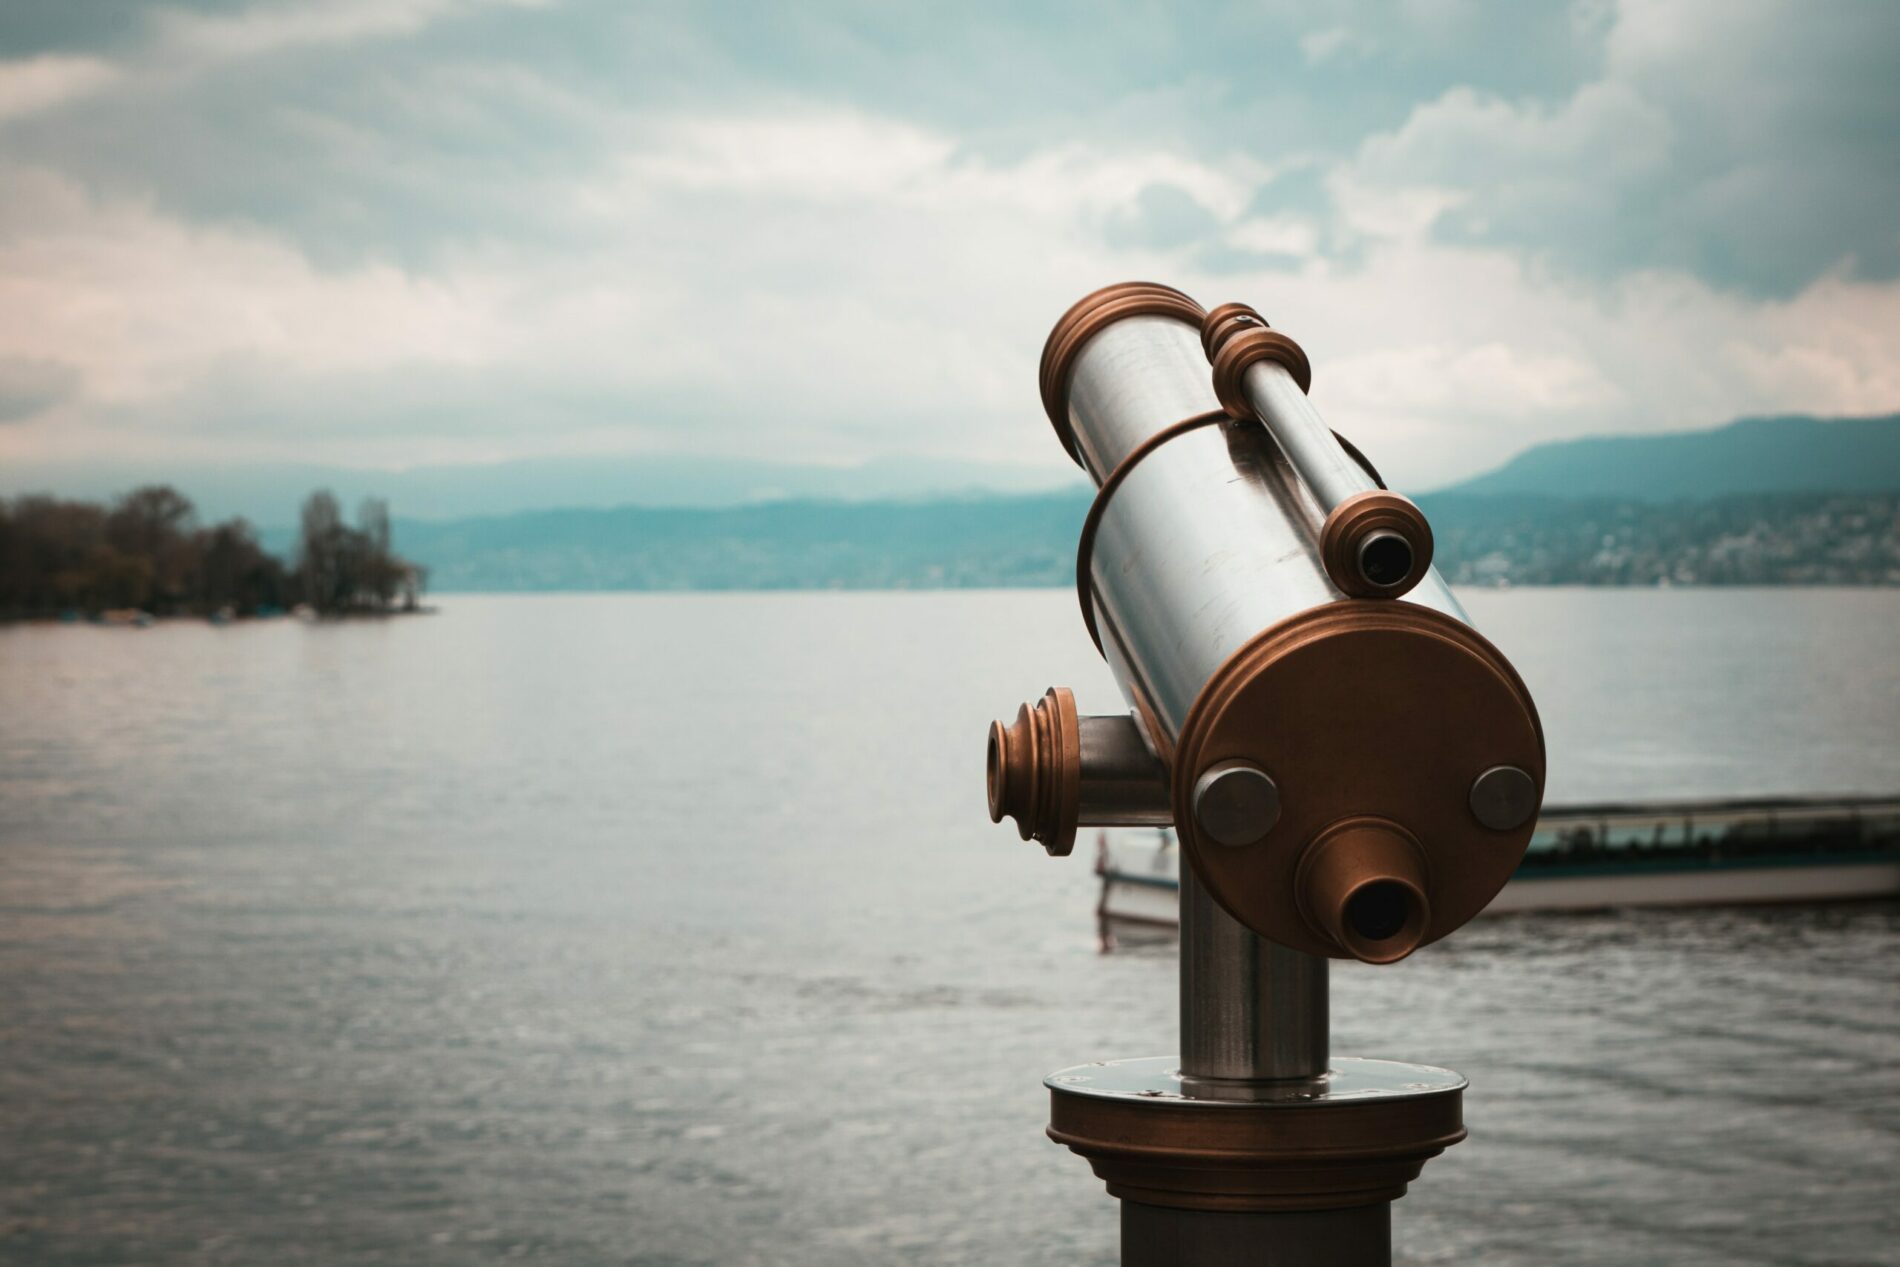 binoculars in front of a lake